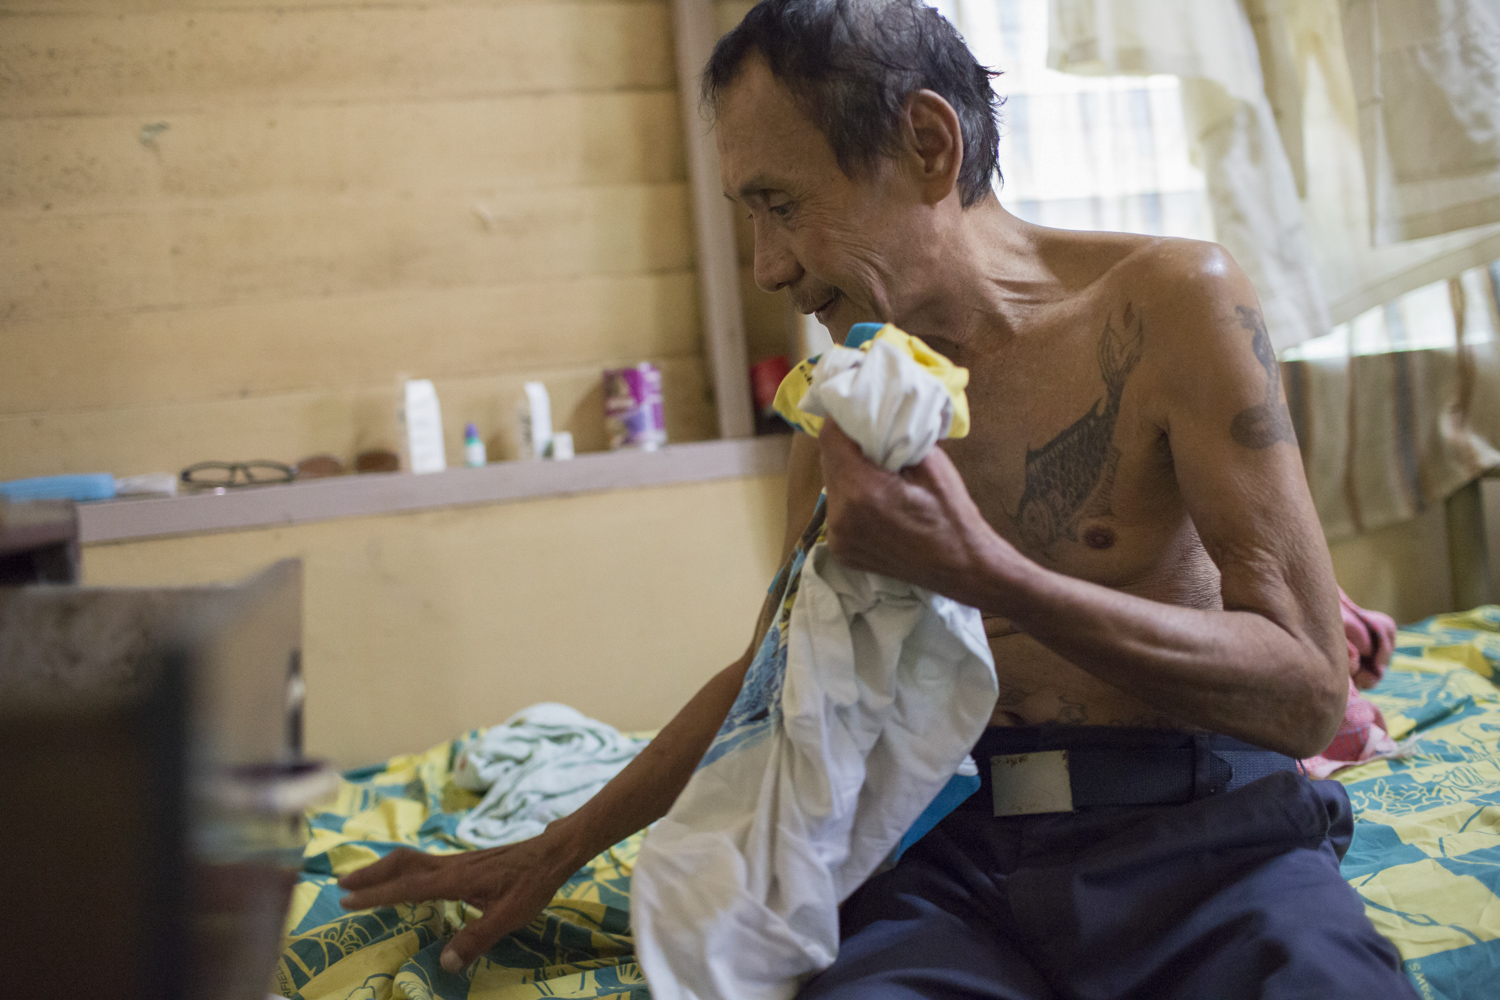 63 year-old Joseph is PLC’s longest staying resident, and everyone looks up to him. He shared a Chinese proverb saying, “No flower can stay in bloom for one hundred days,” signifying how nothing lasts in the drug world, and trouble will eventually come. He emphasised how it is important to love oneself to learn self-control and discipline.